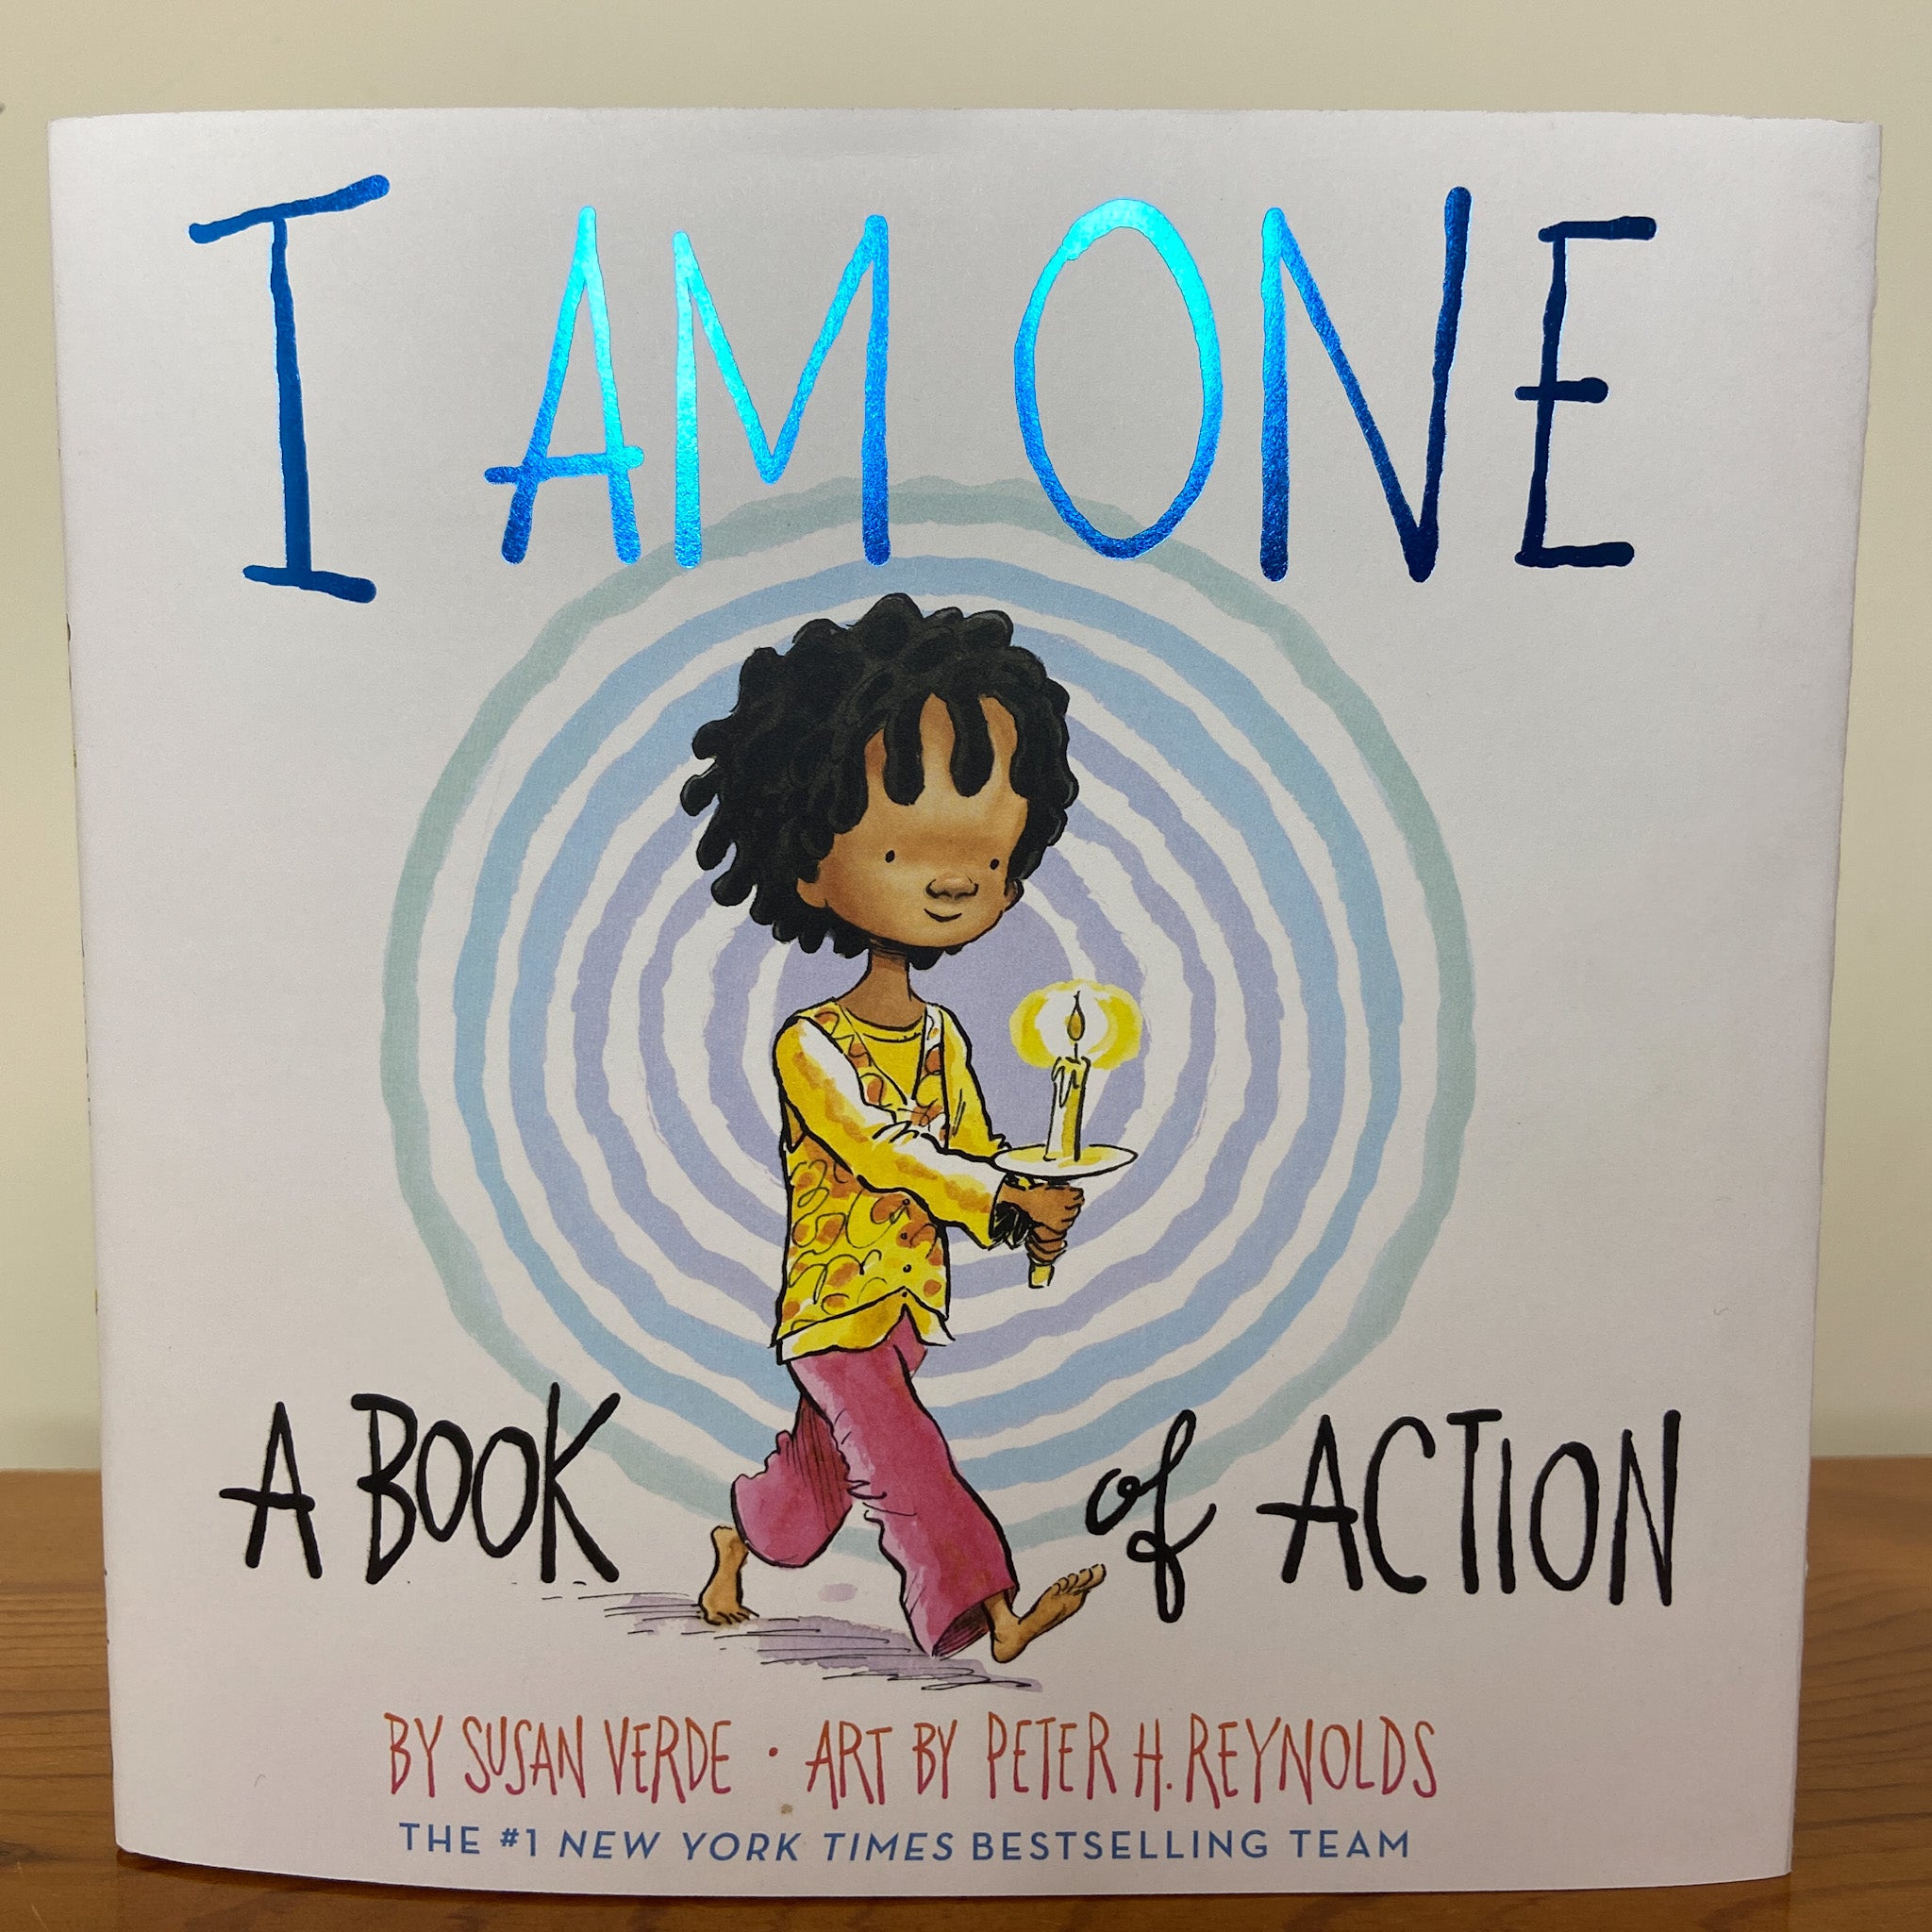 I AM ONE : A Book of Action